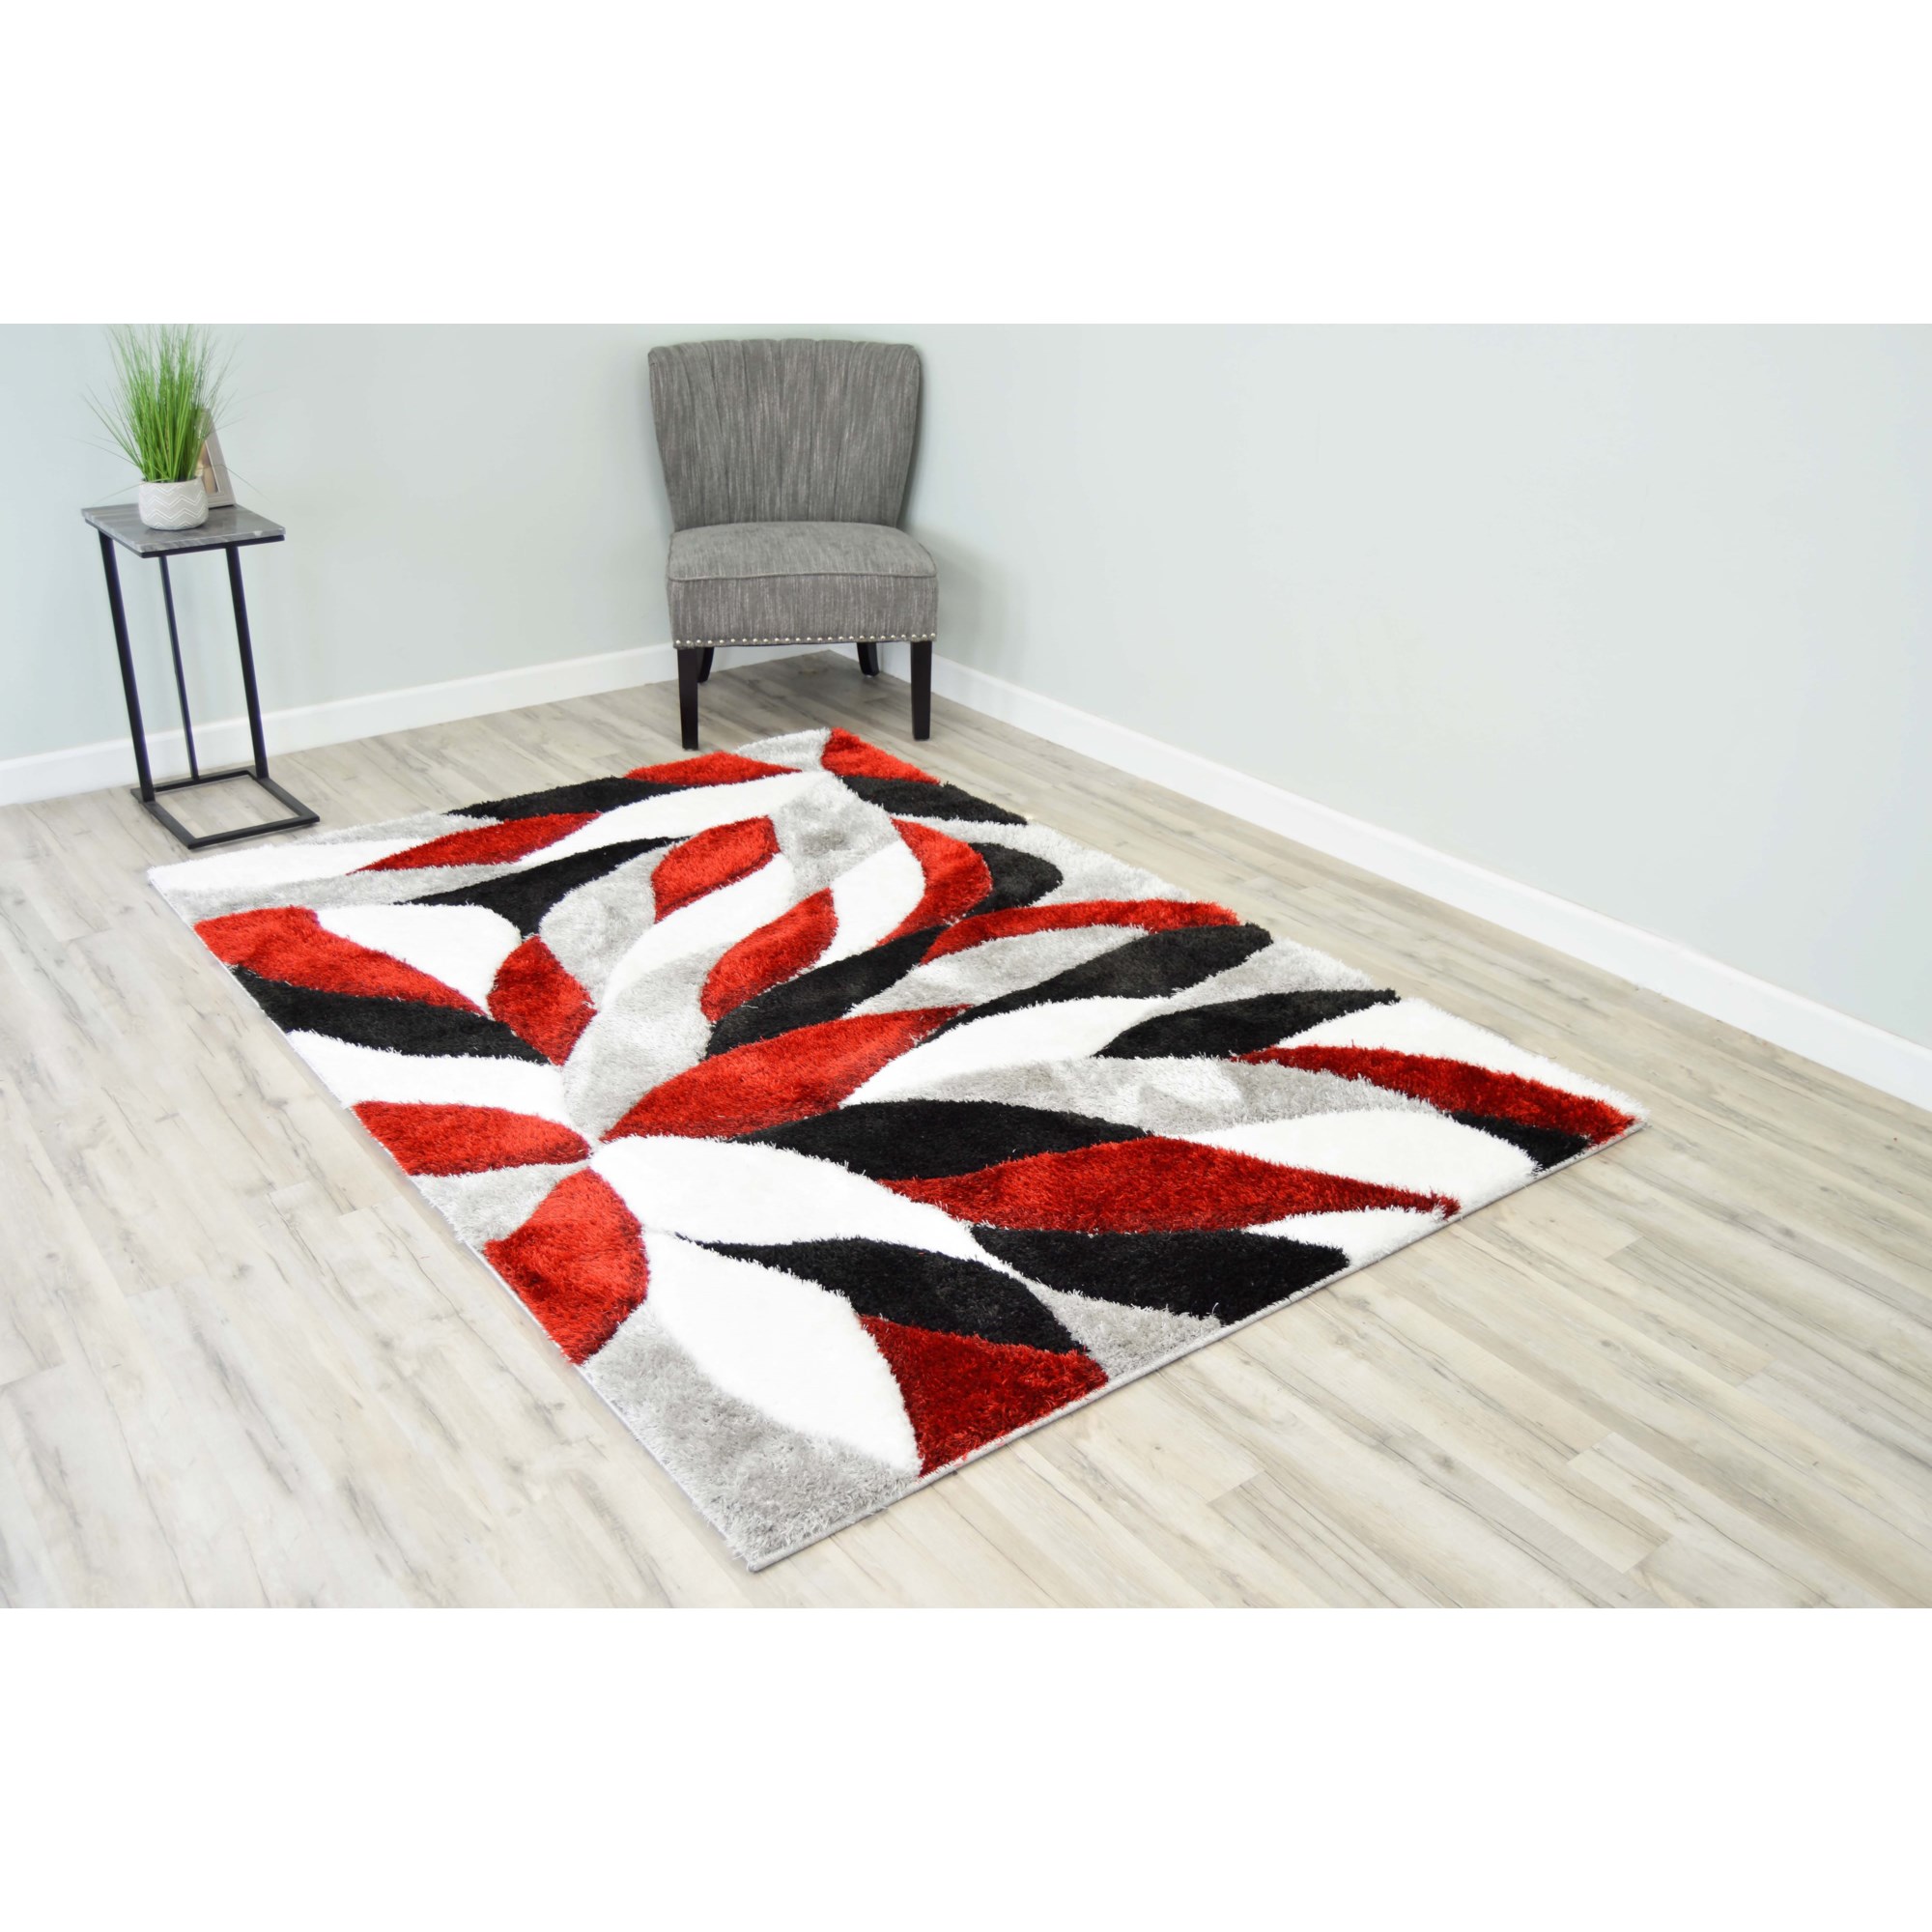 Red Black Gray Abstract Wave Area Rug, Kitchen Floor Mat, Office